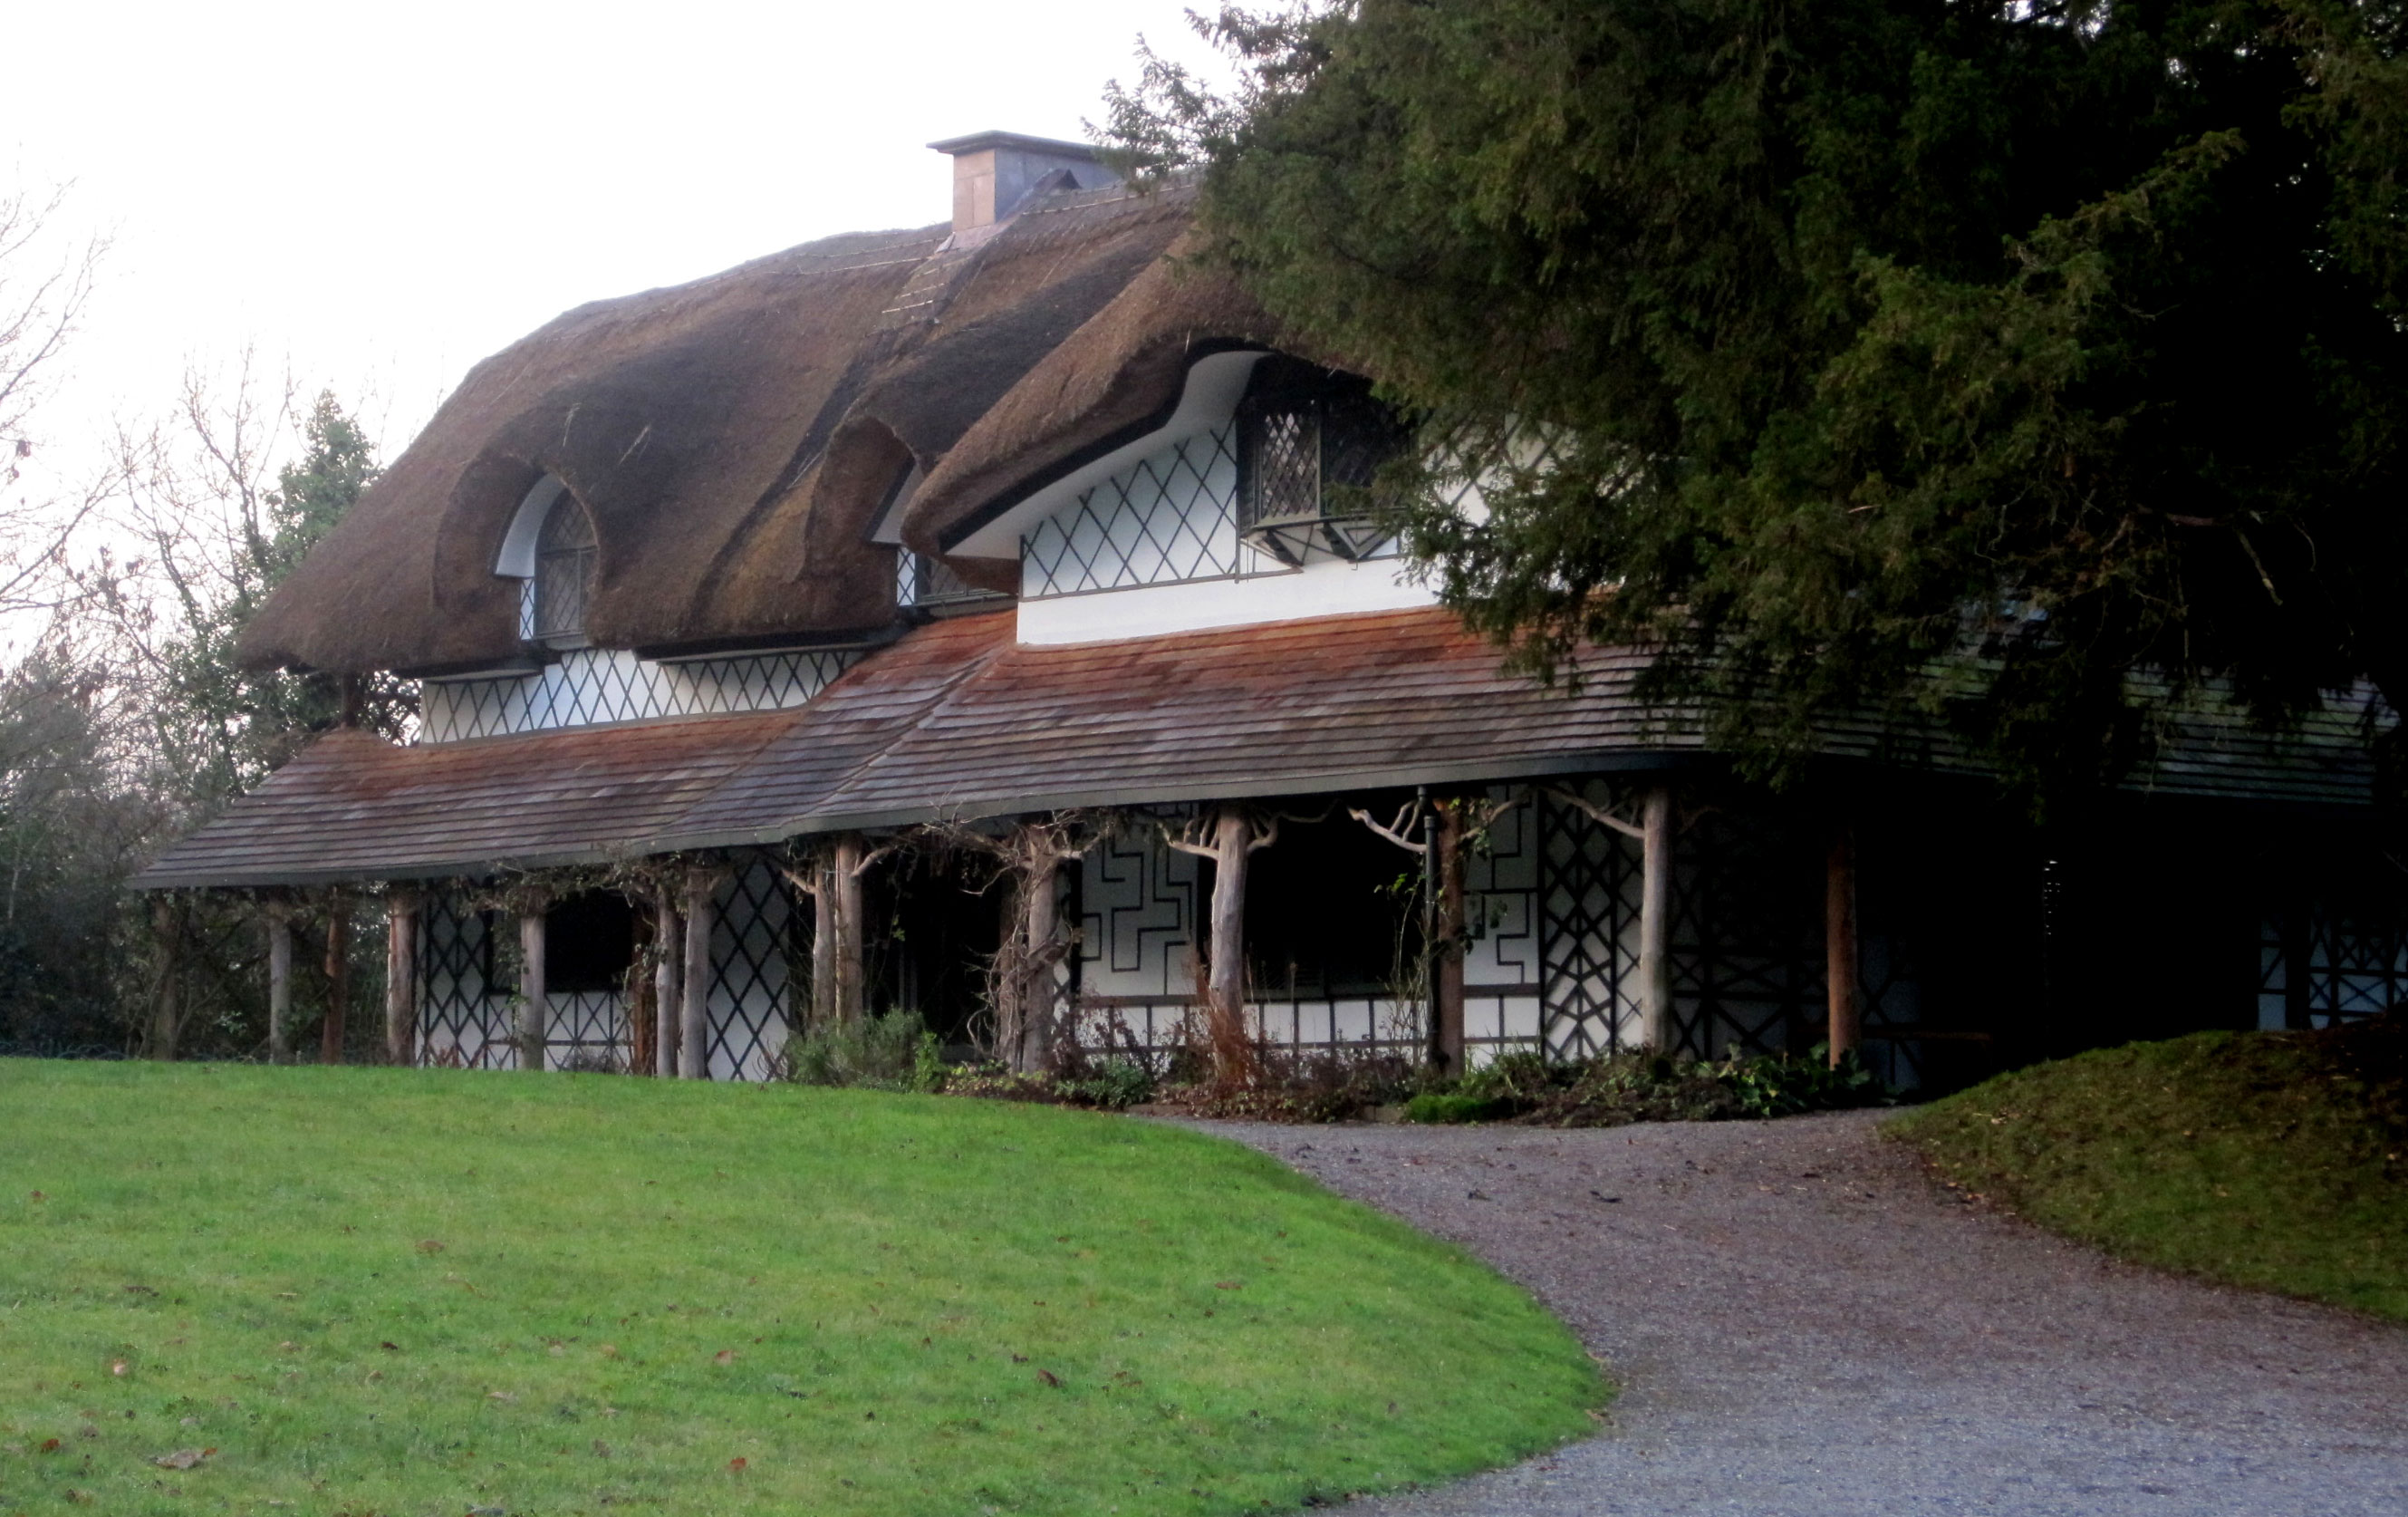 The Swiss Cottage